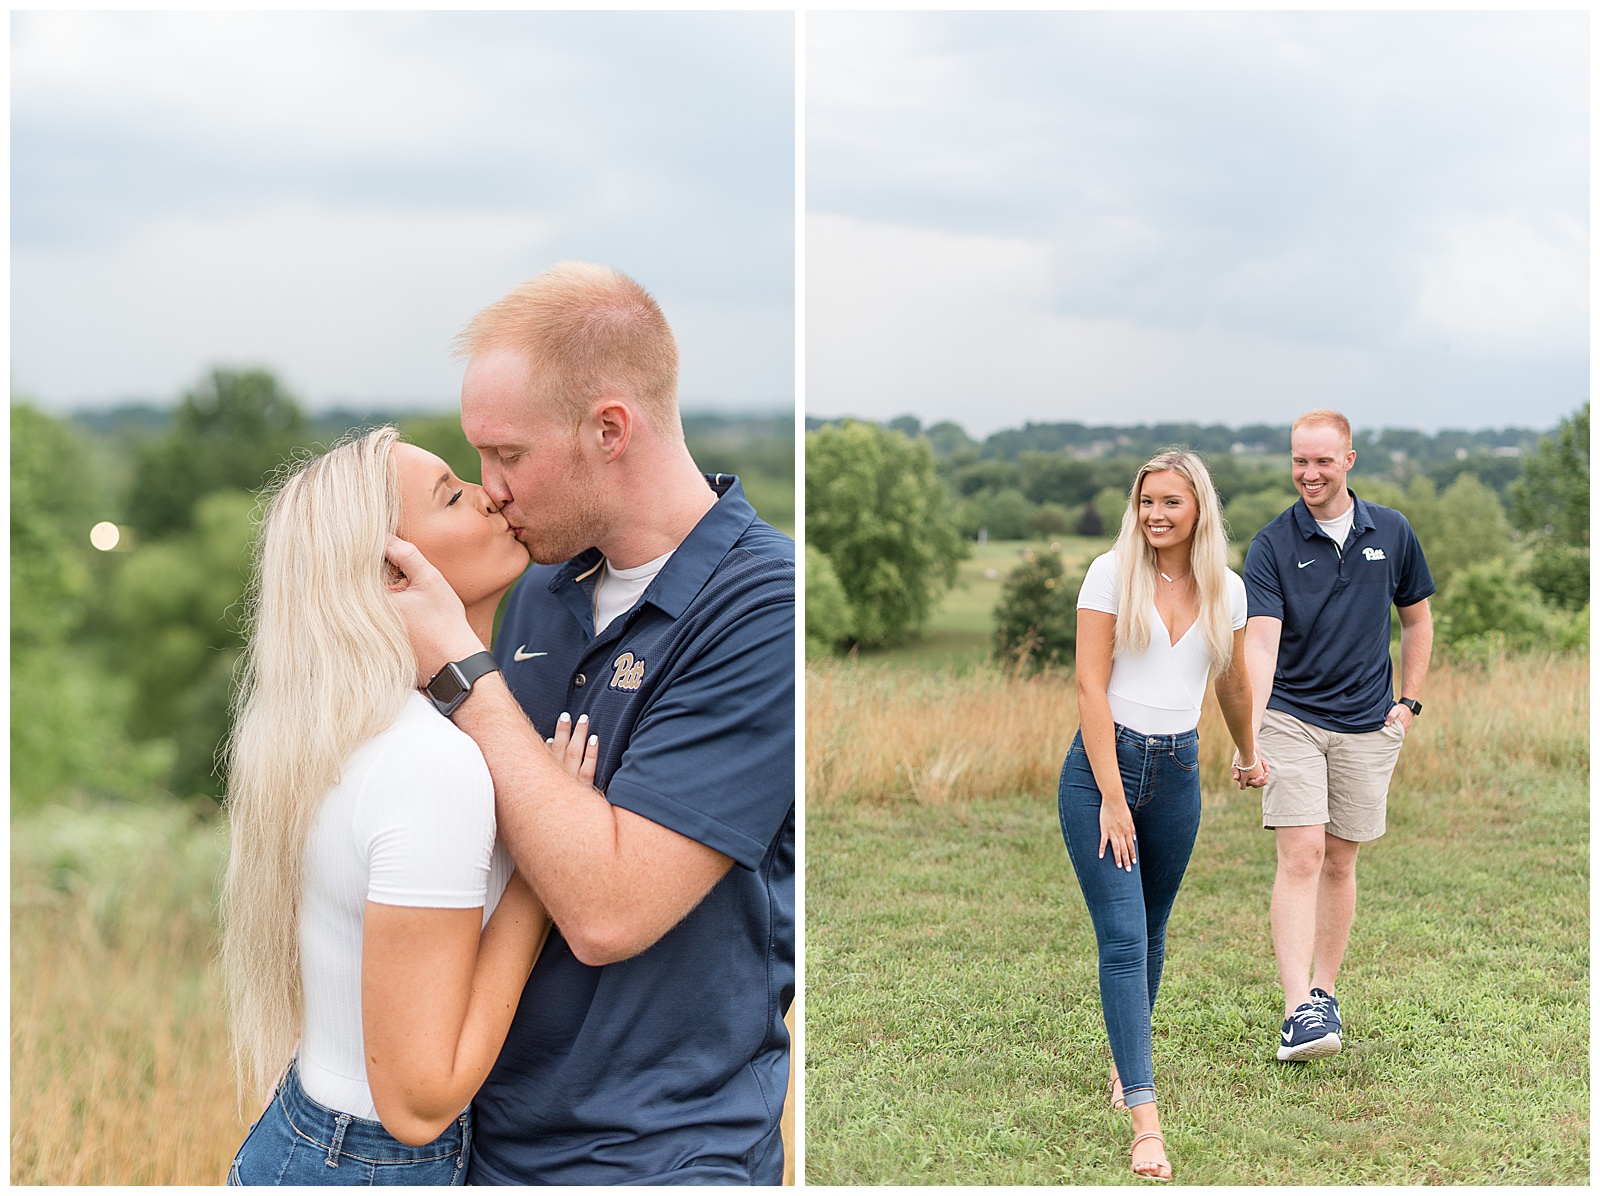 Overlook Park engagement session with girl in white t-shirt and guy in navy blue shirt